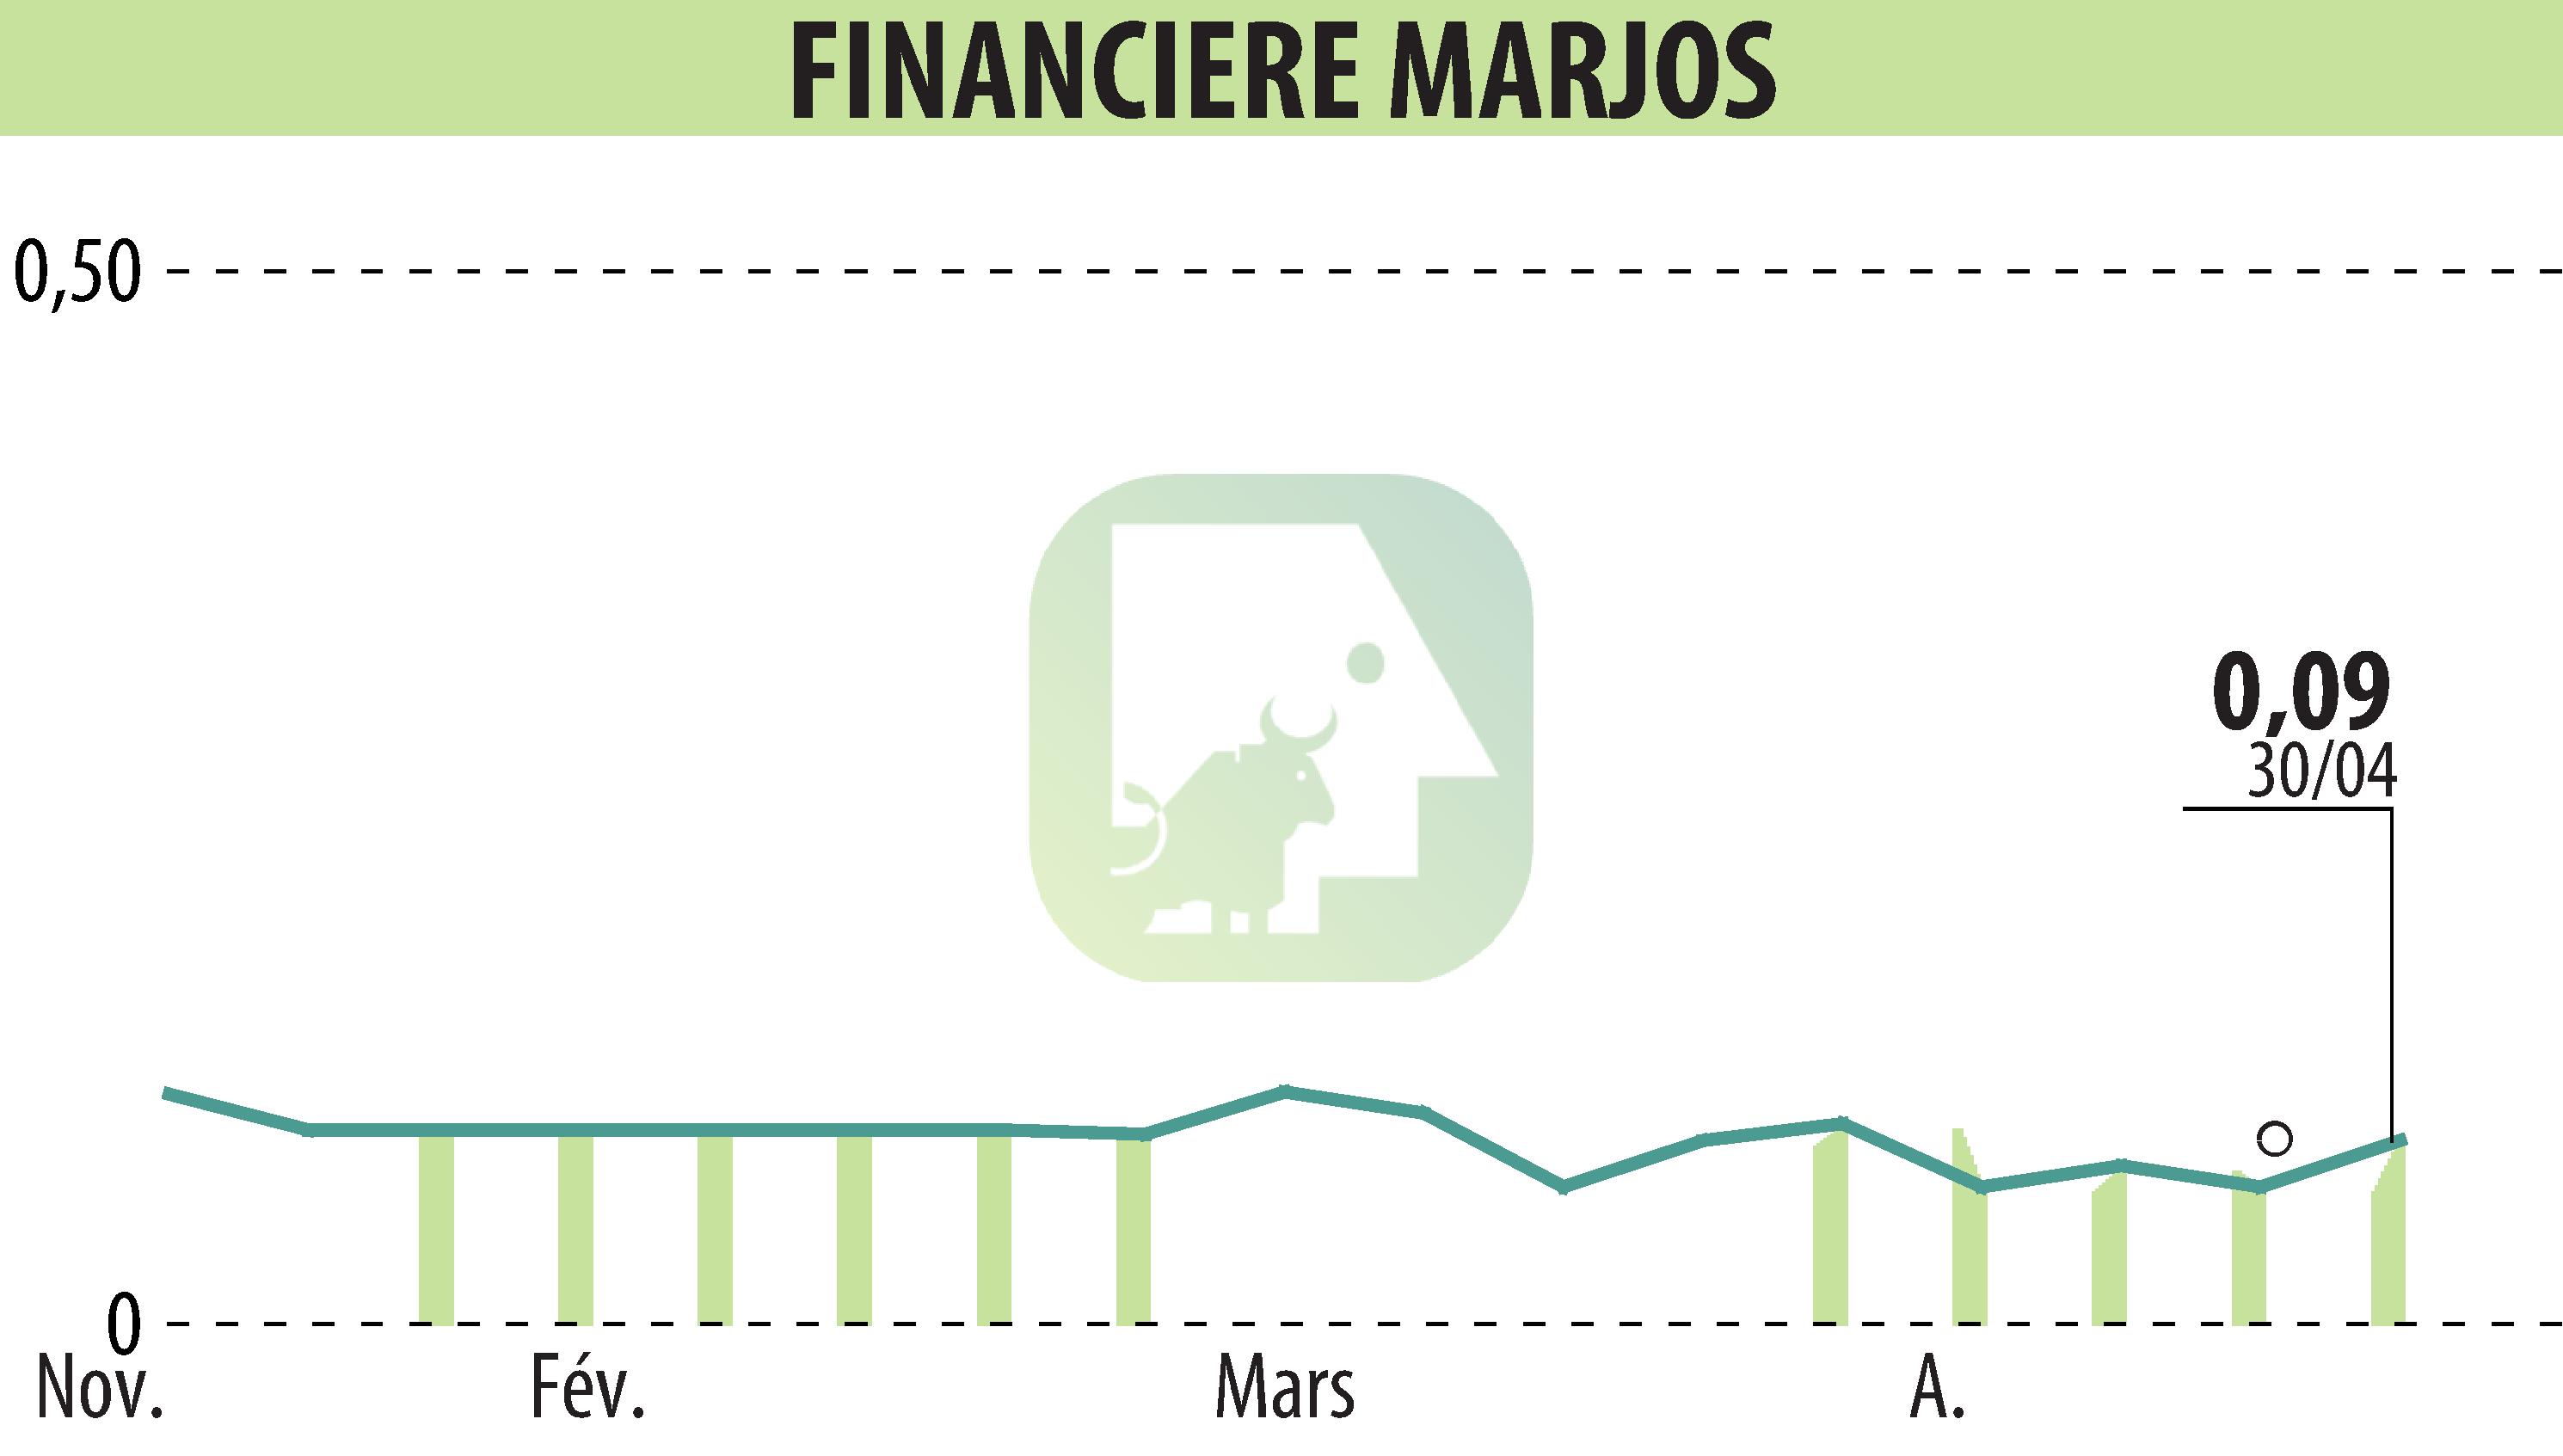 Stock price chart of FINANCIERE MARJOS (EPA:FINM) showing fluctuations.